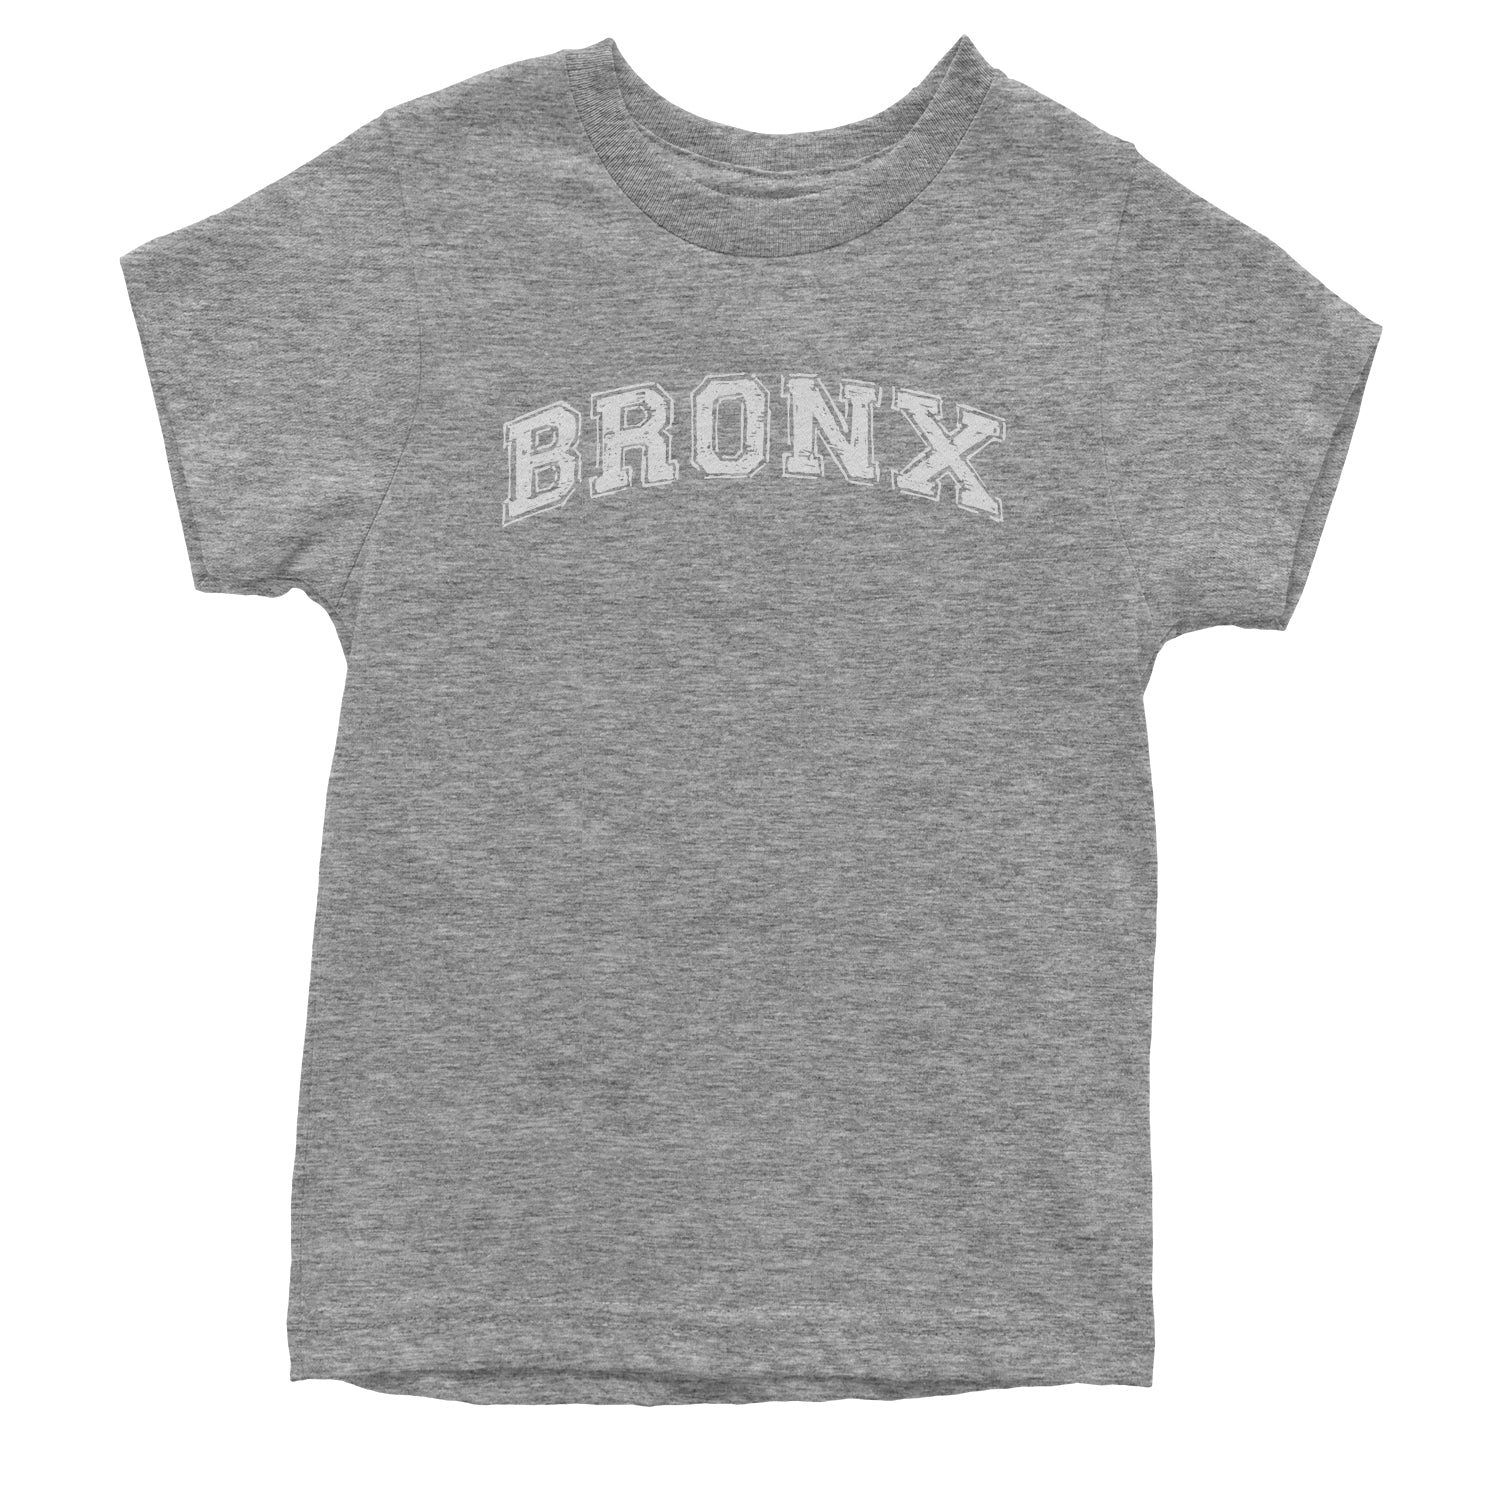 Bronx - From The Block Youth T-shirt b, cardi, concert, its, Jennifer, lopez, merch, my, party, tour by Expression Tees